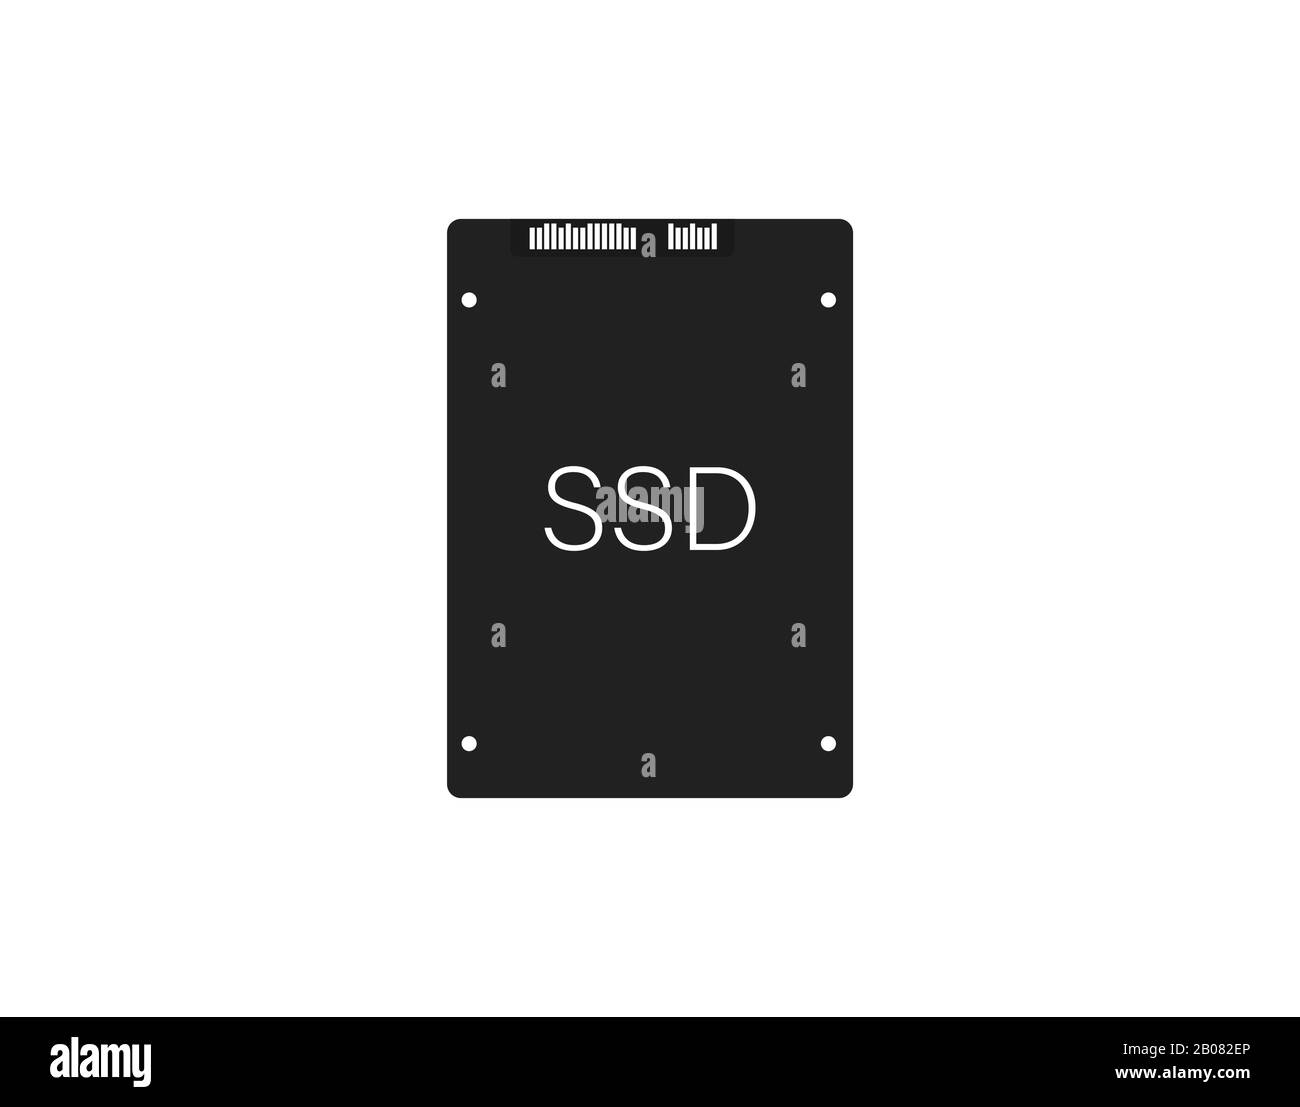 Solid state drive, ssd icon. Vector illustration, flat design. Stock Vector